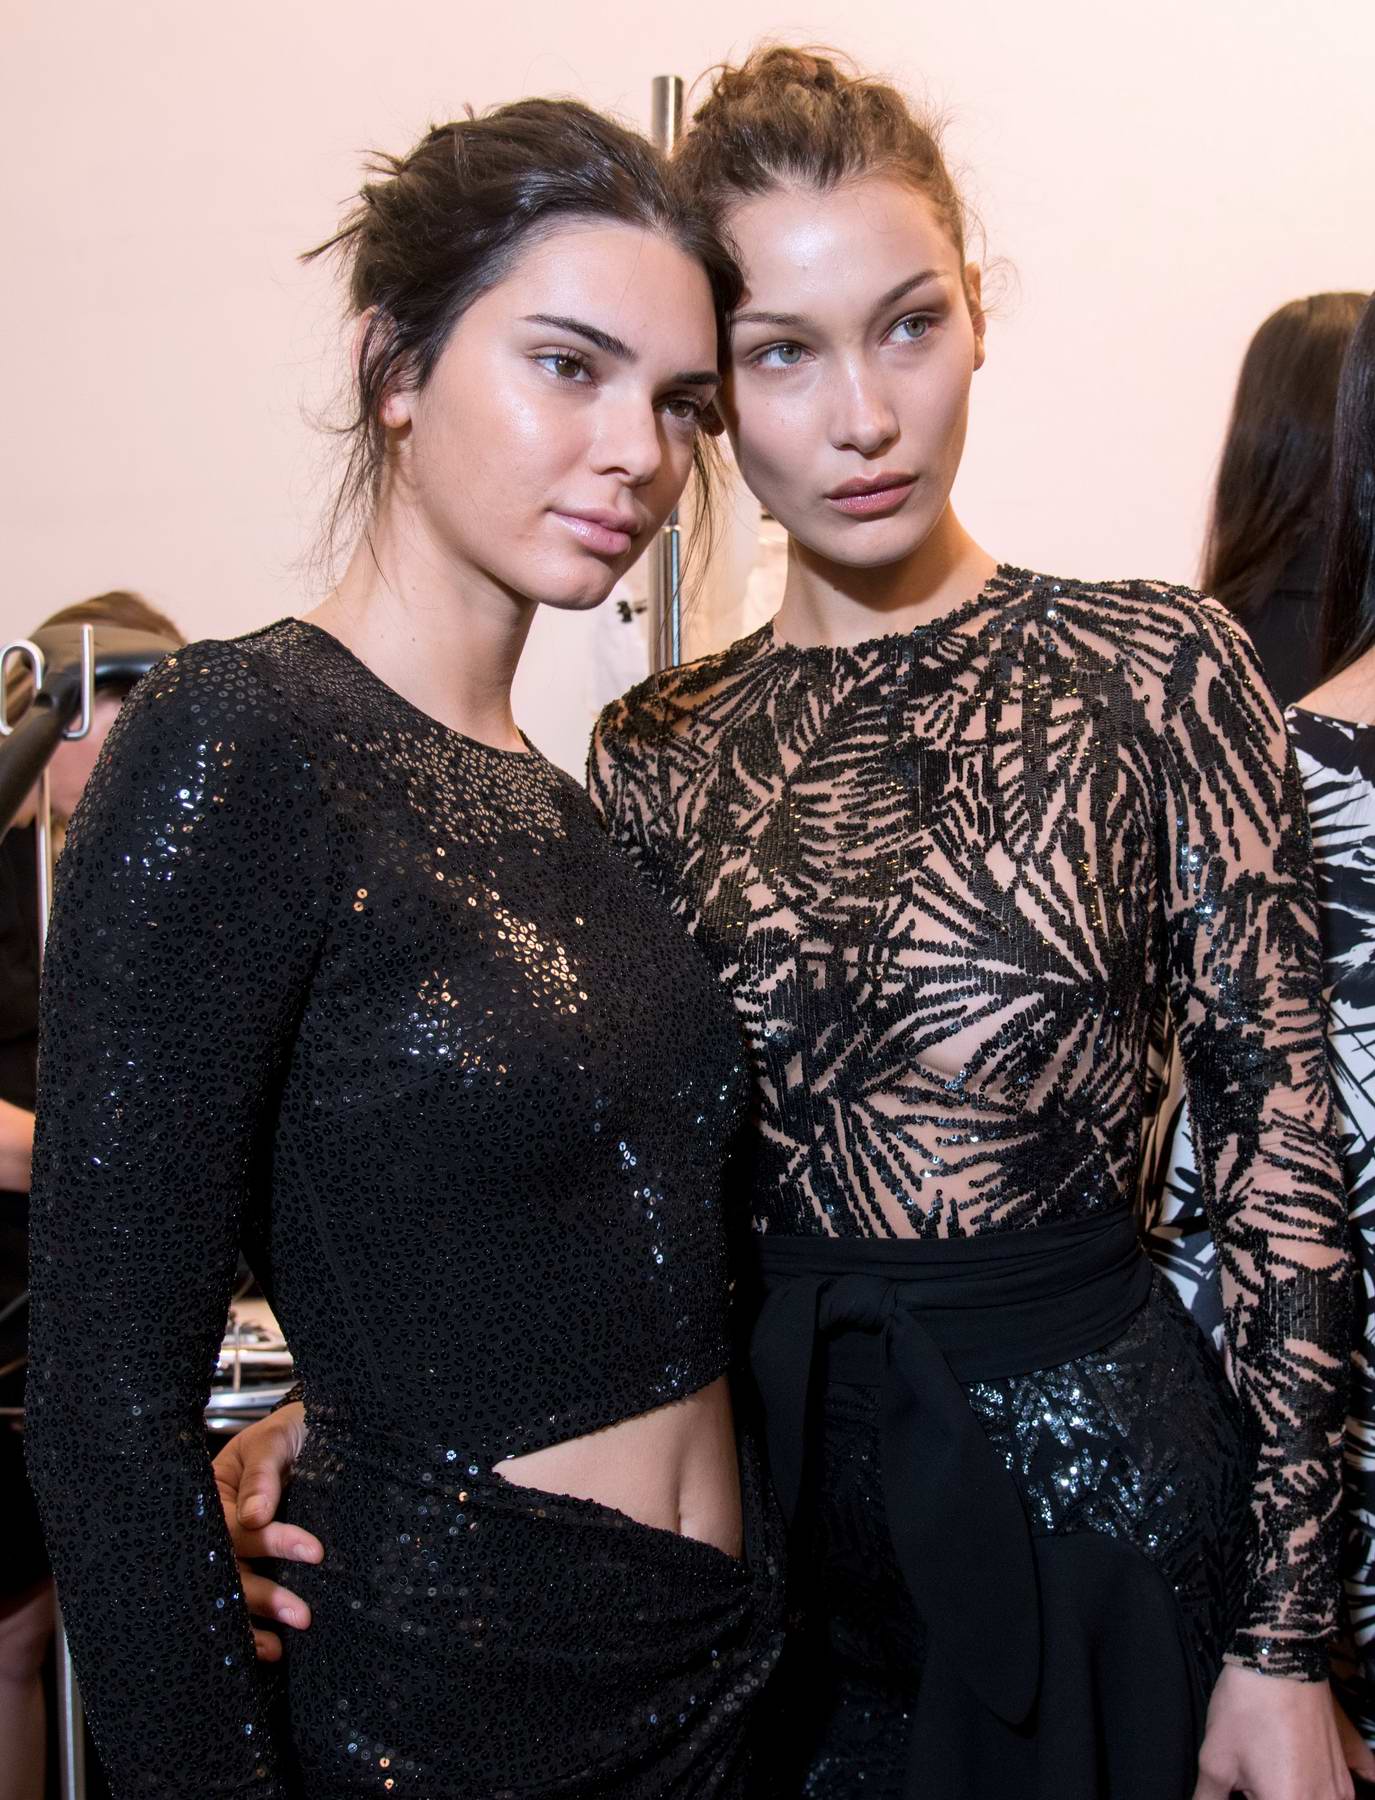 kendall jenner and bella hadid backstage at the michael kors show ...